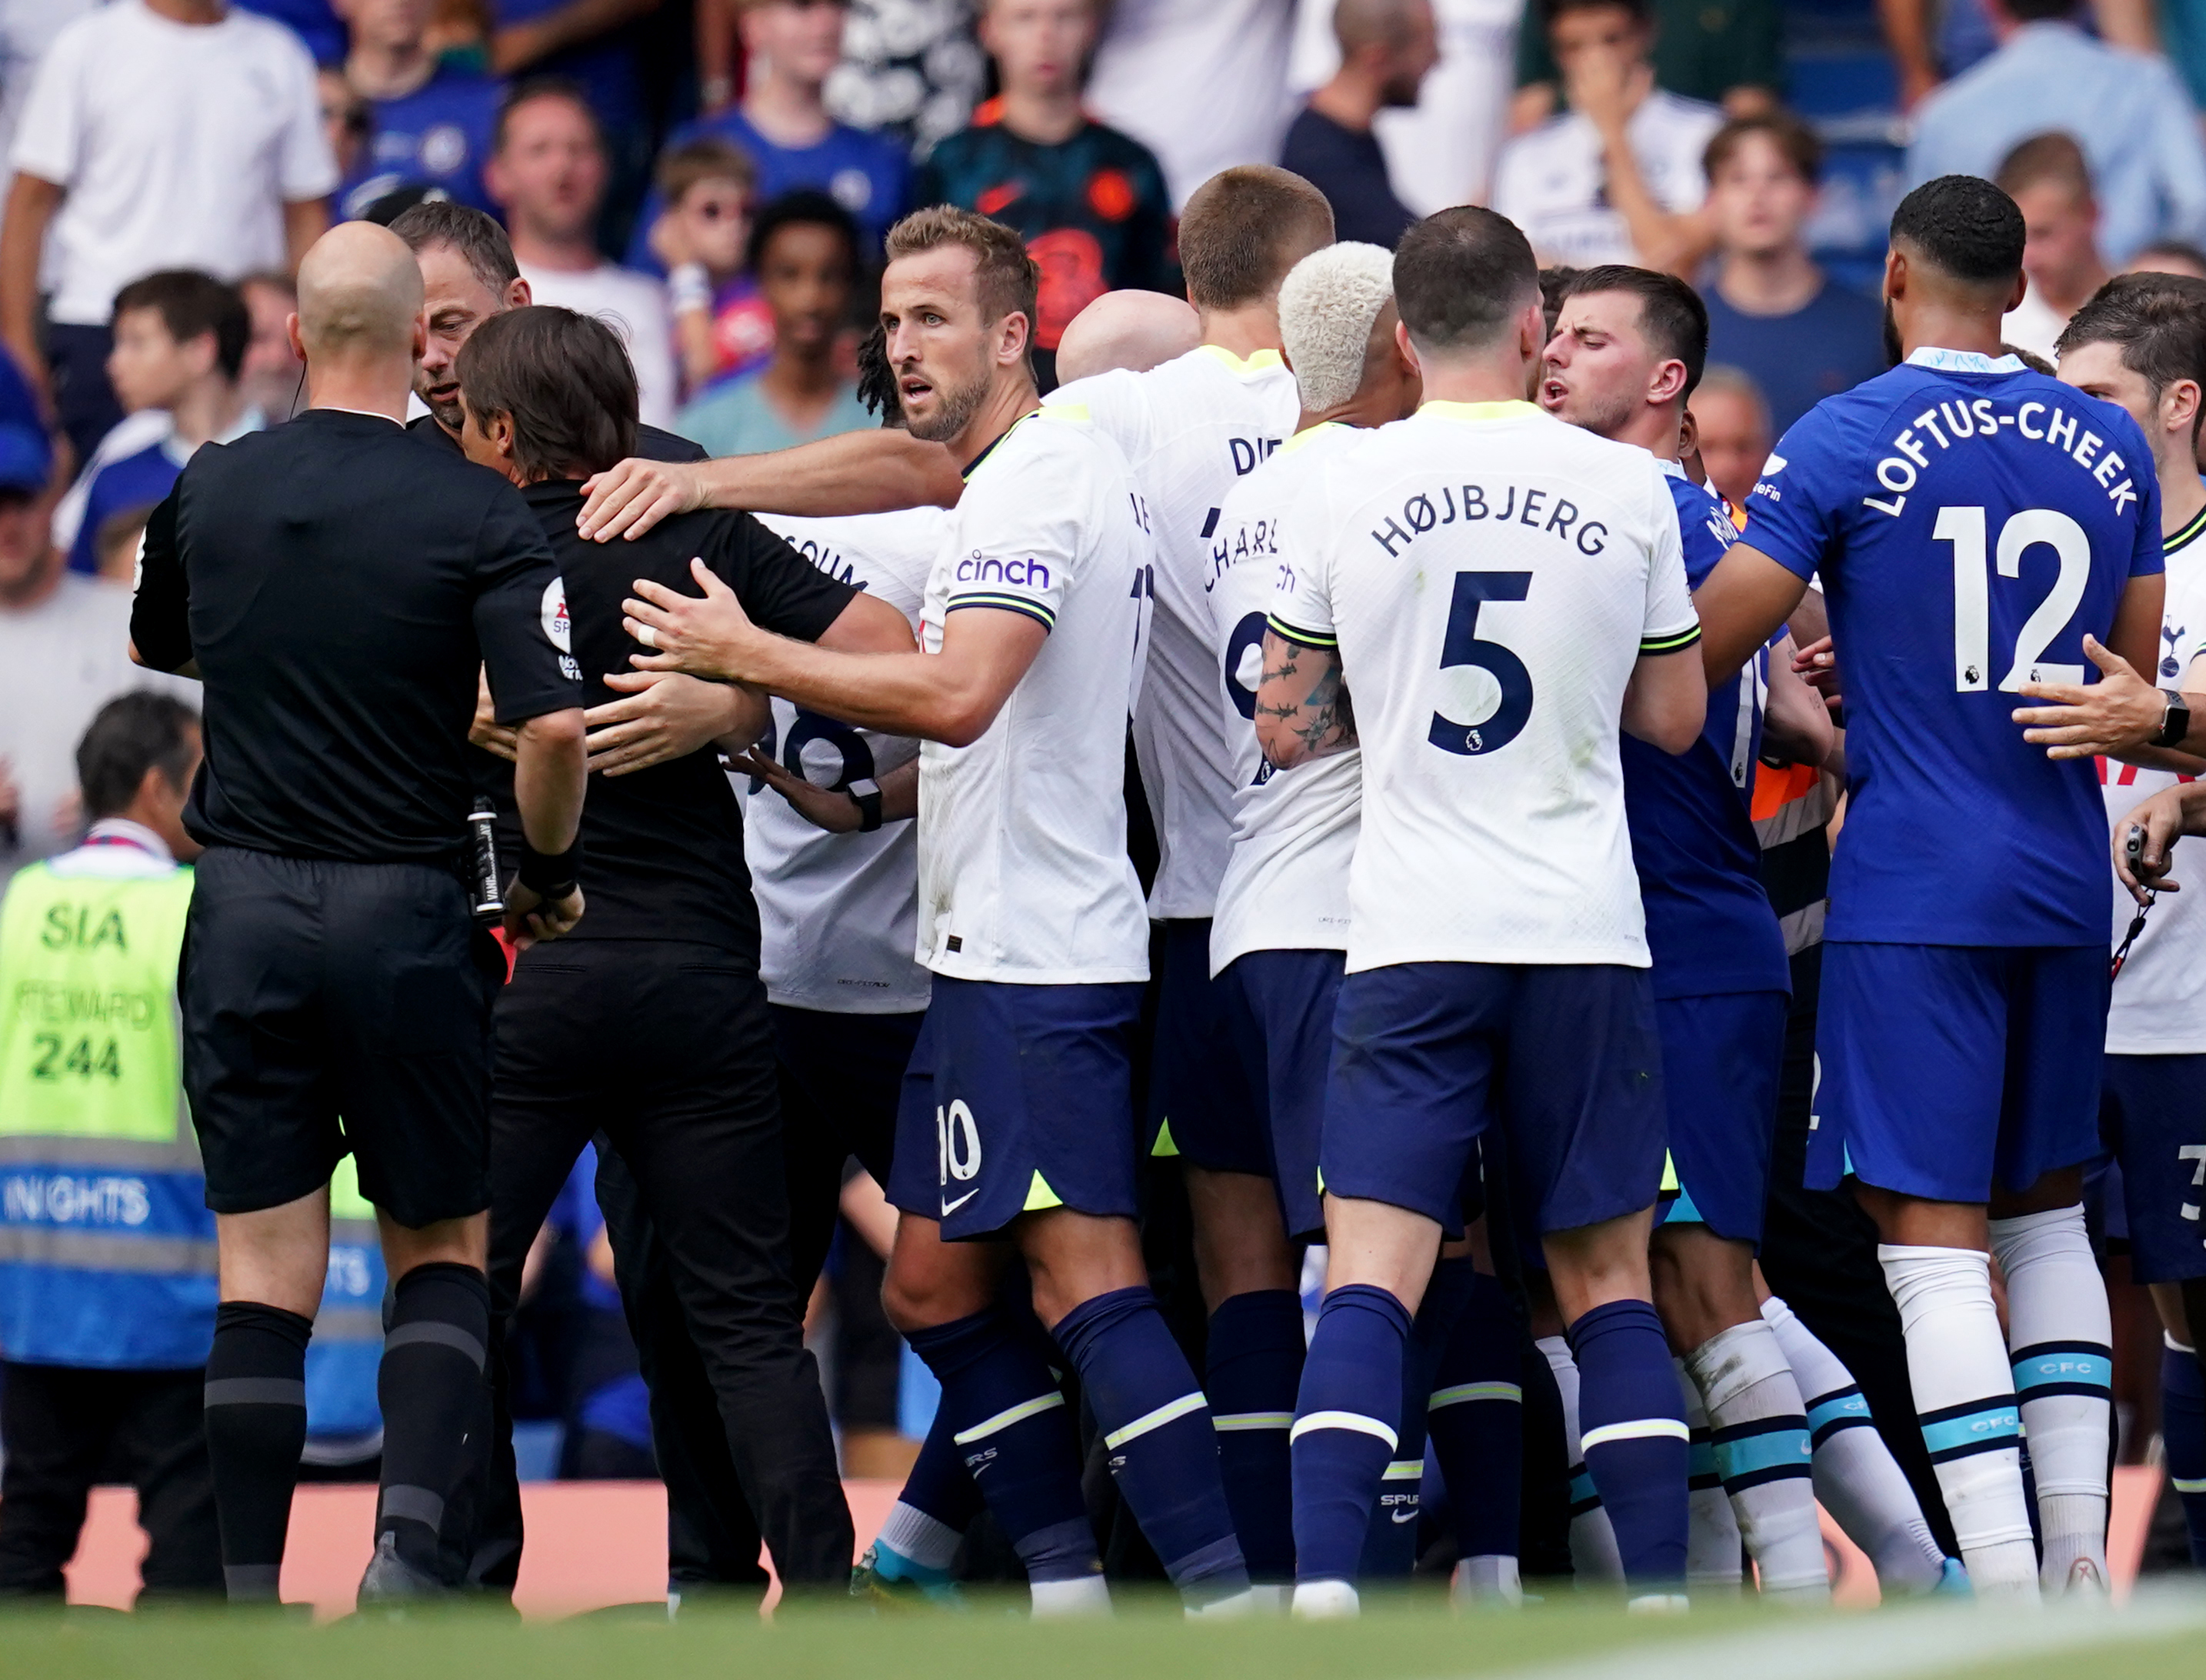 Mike Dean avoided VAR call to spare official grief in Chelsea-Tottenham clash